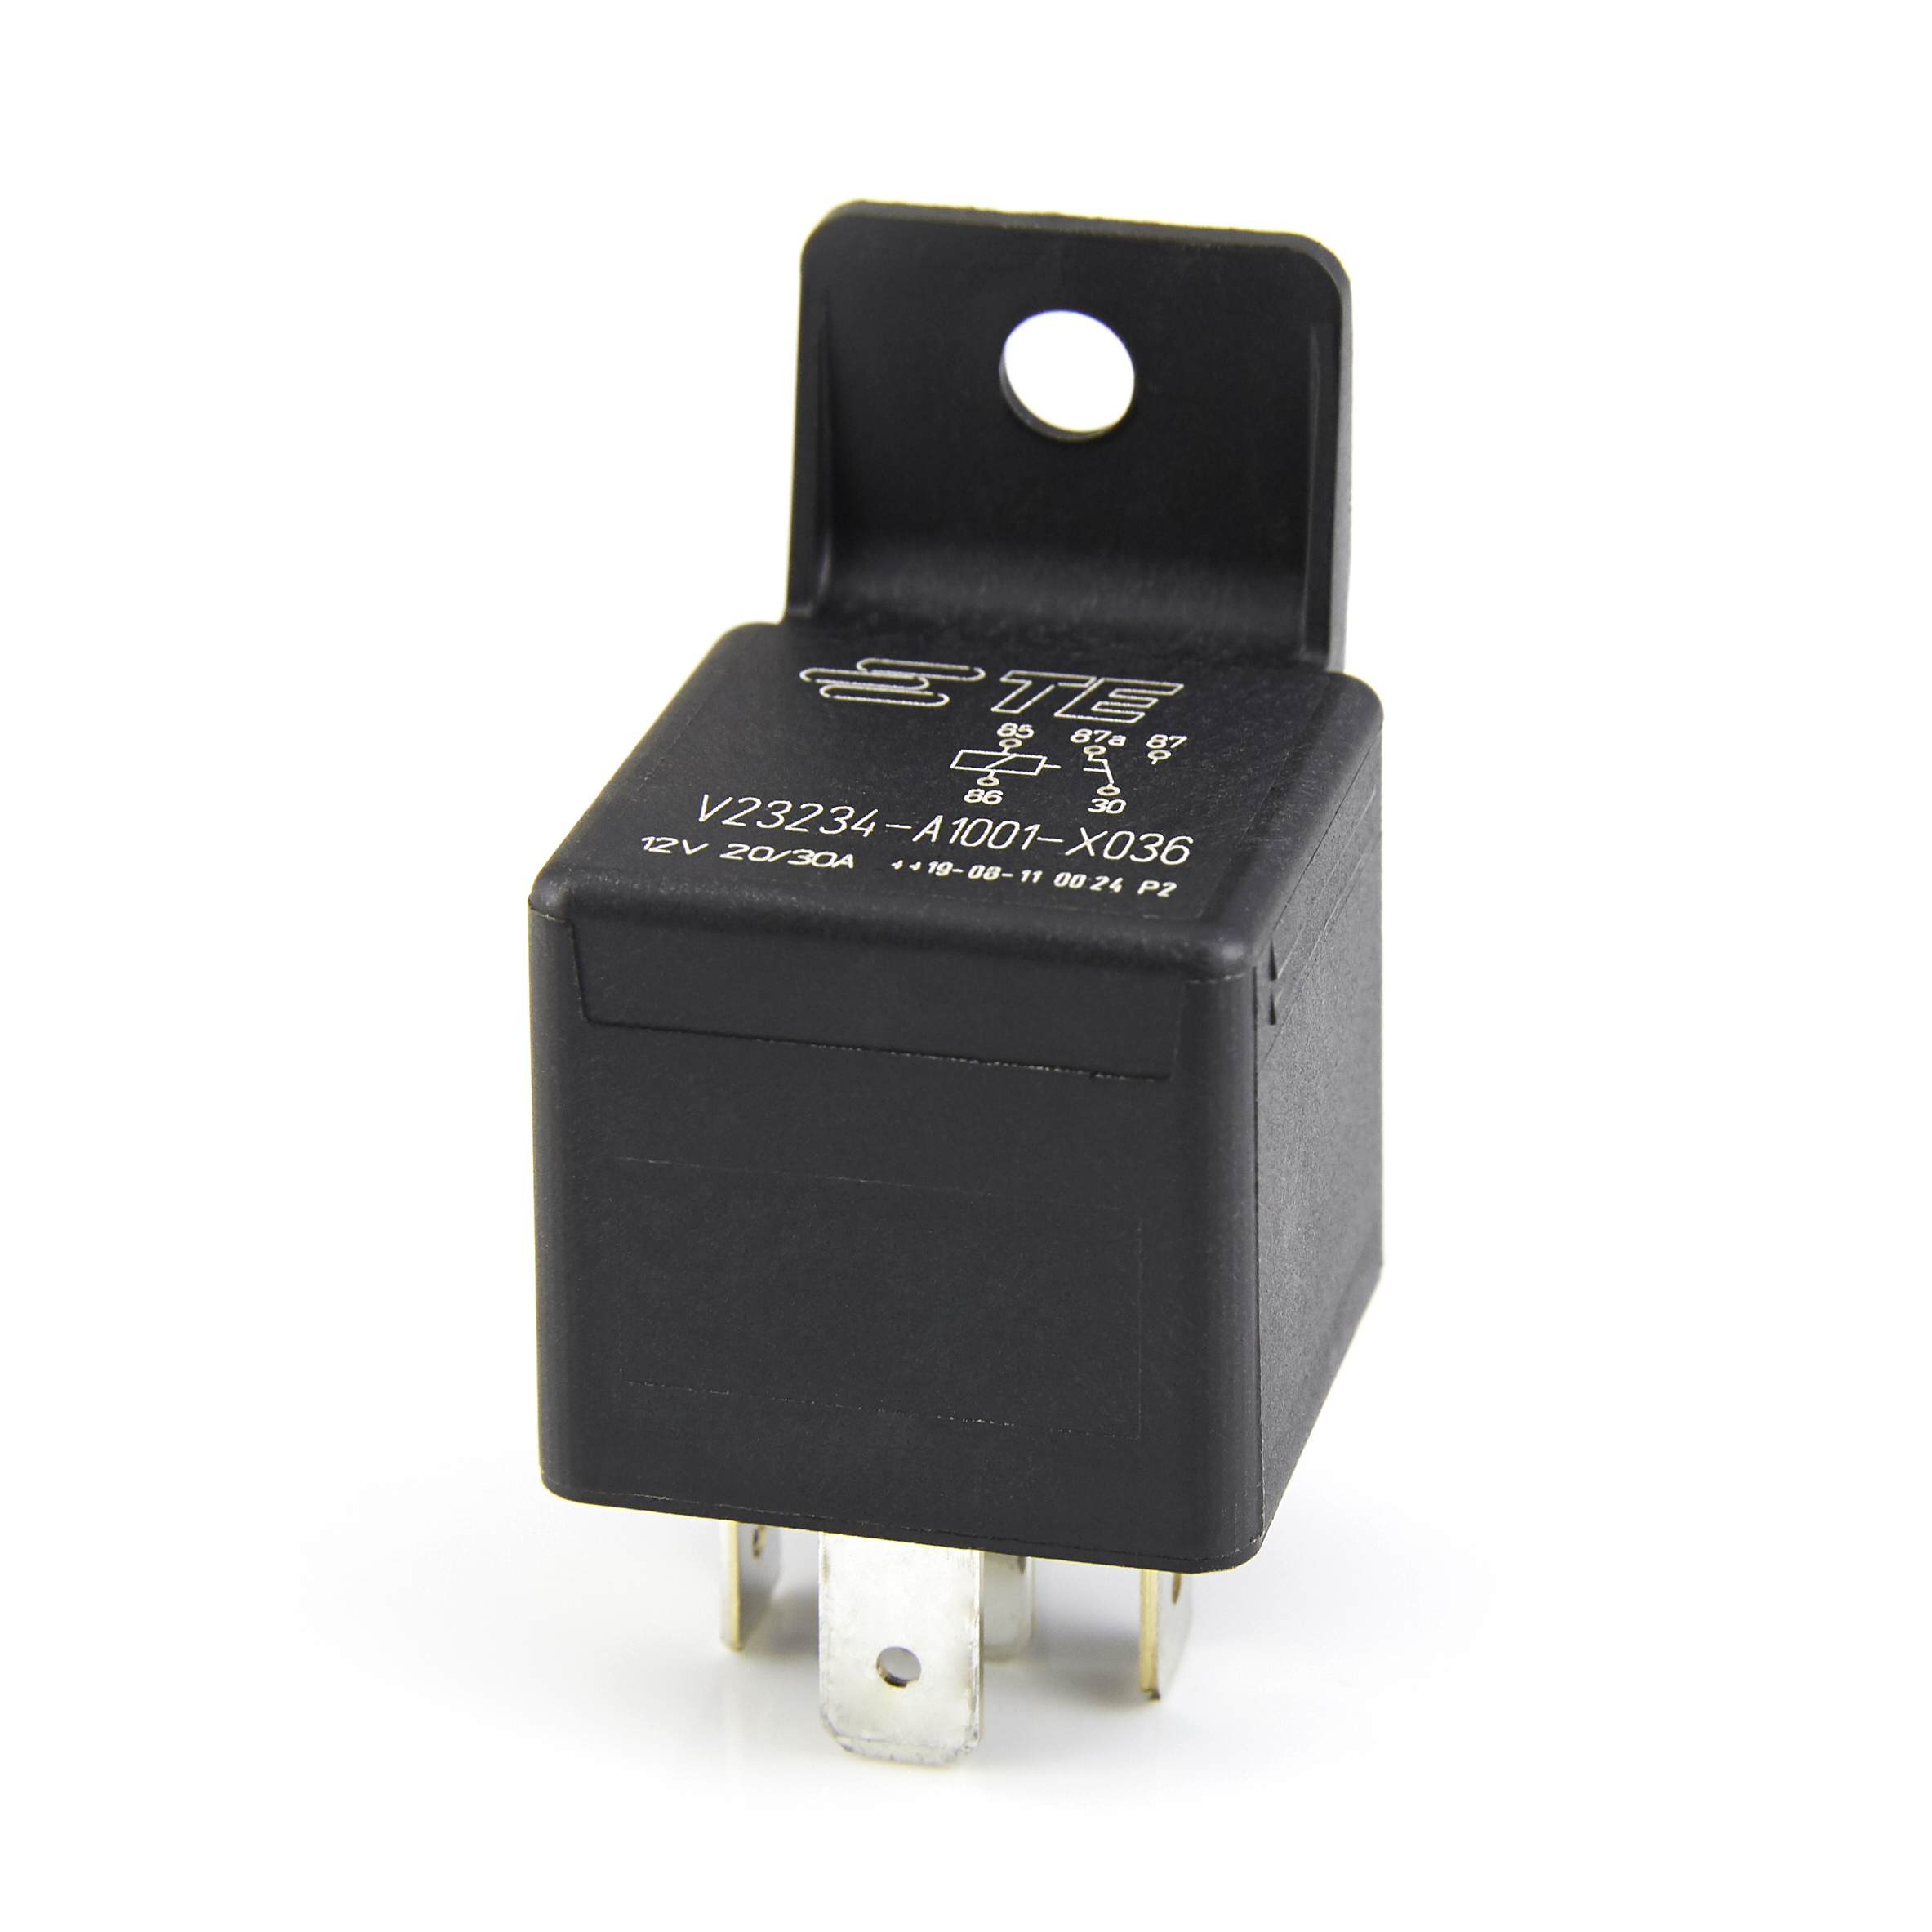 Example of a Mini ISO relay.